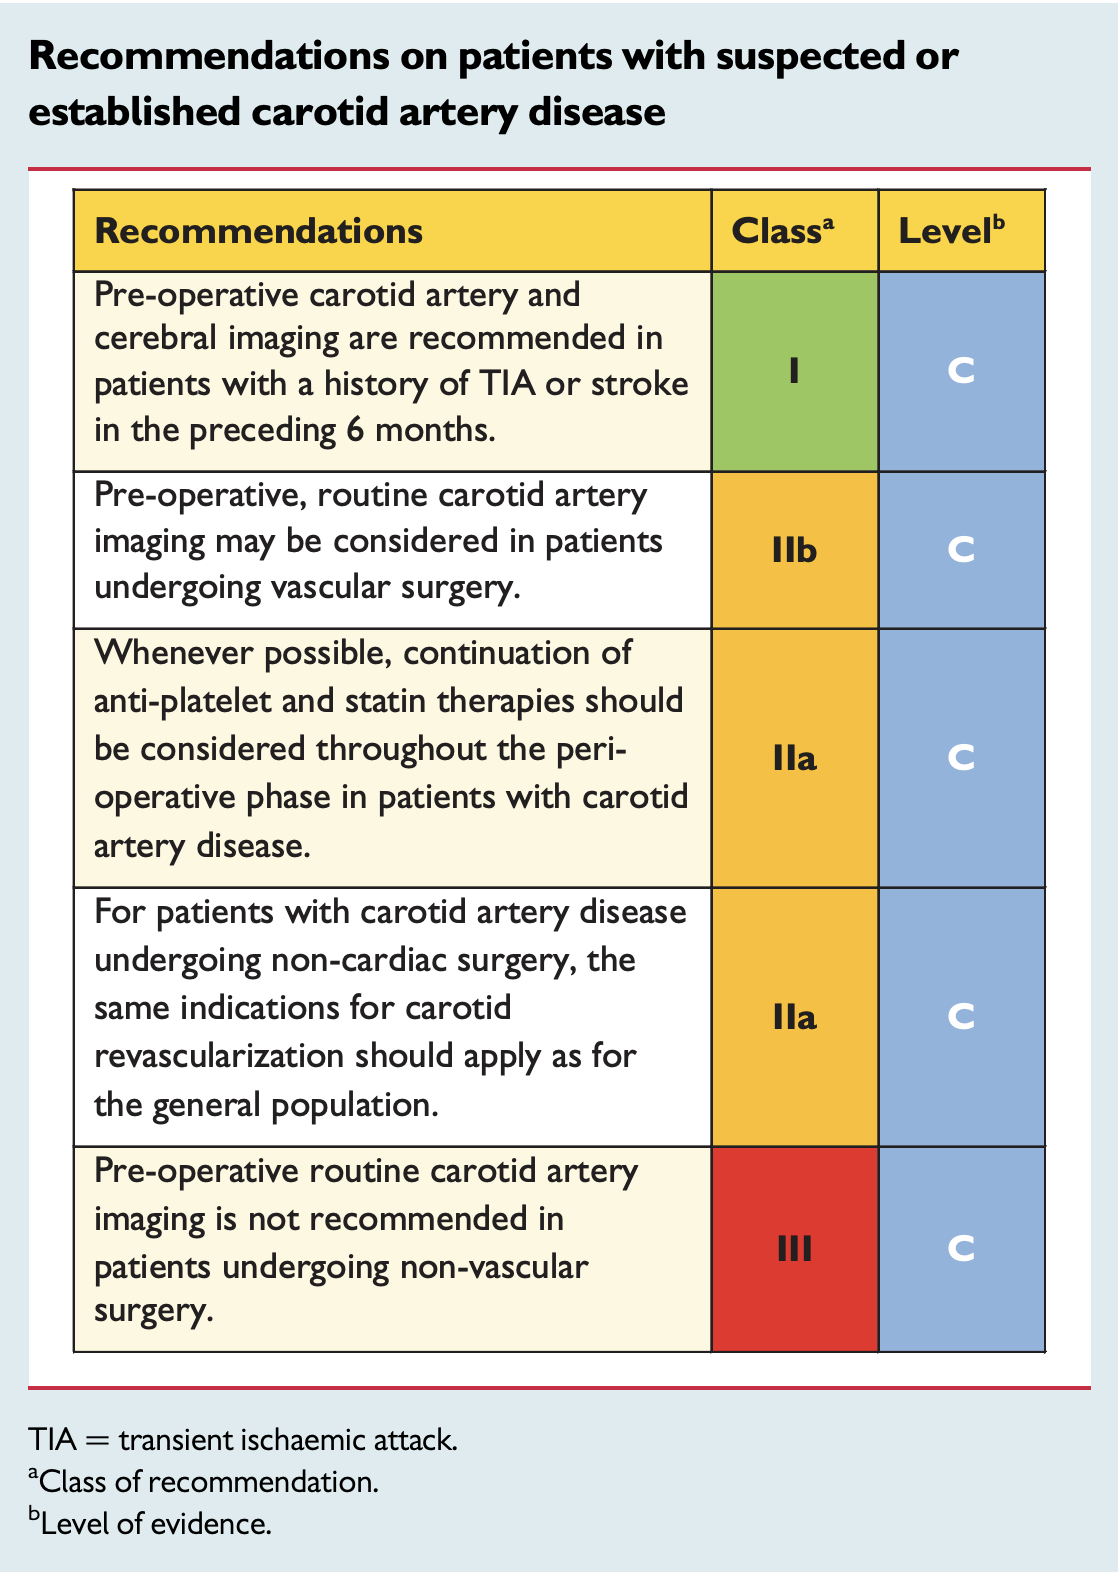 Recommendations on patients with suspected or established carotid artery disease